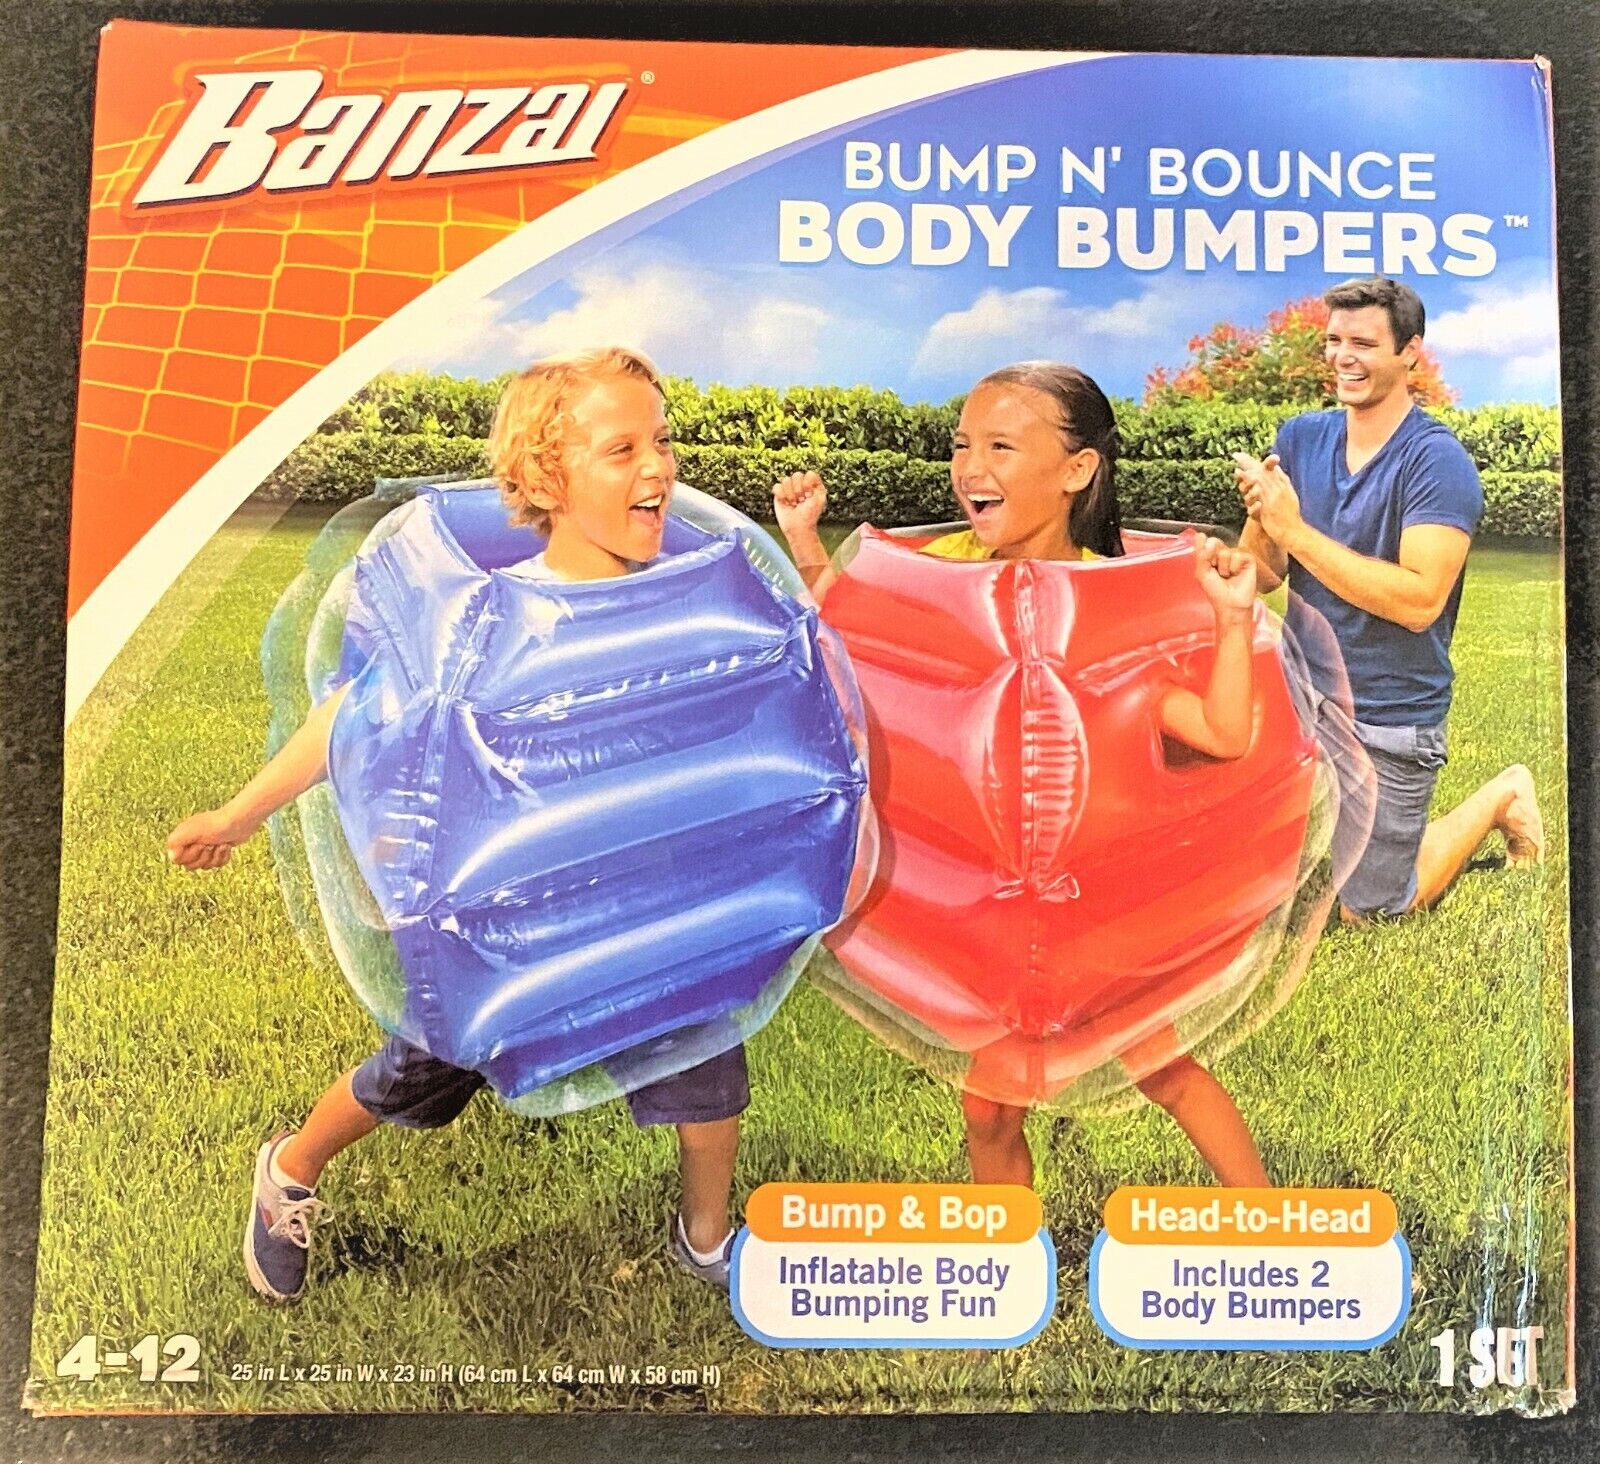 Bump n Bounce Body Bumpers - 2 bumpers included by Banzai by